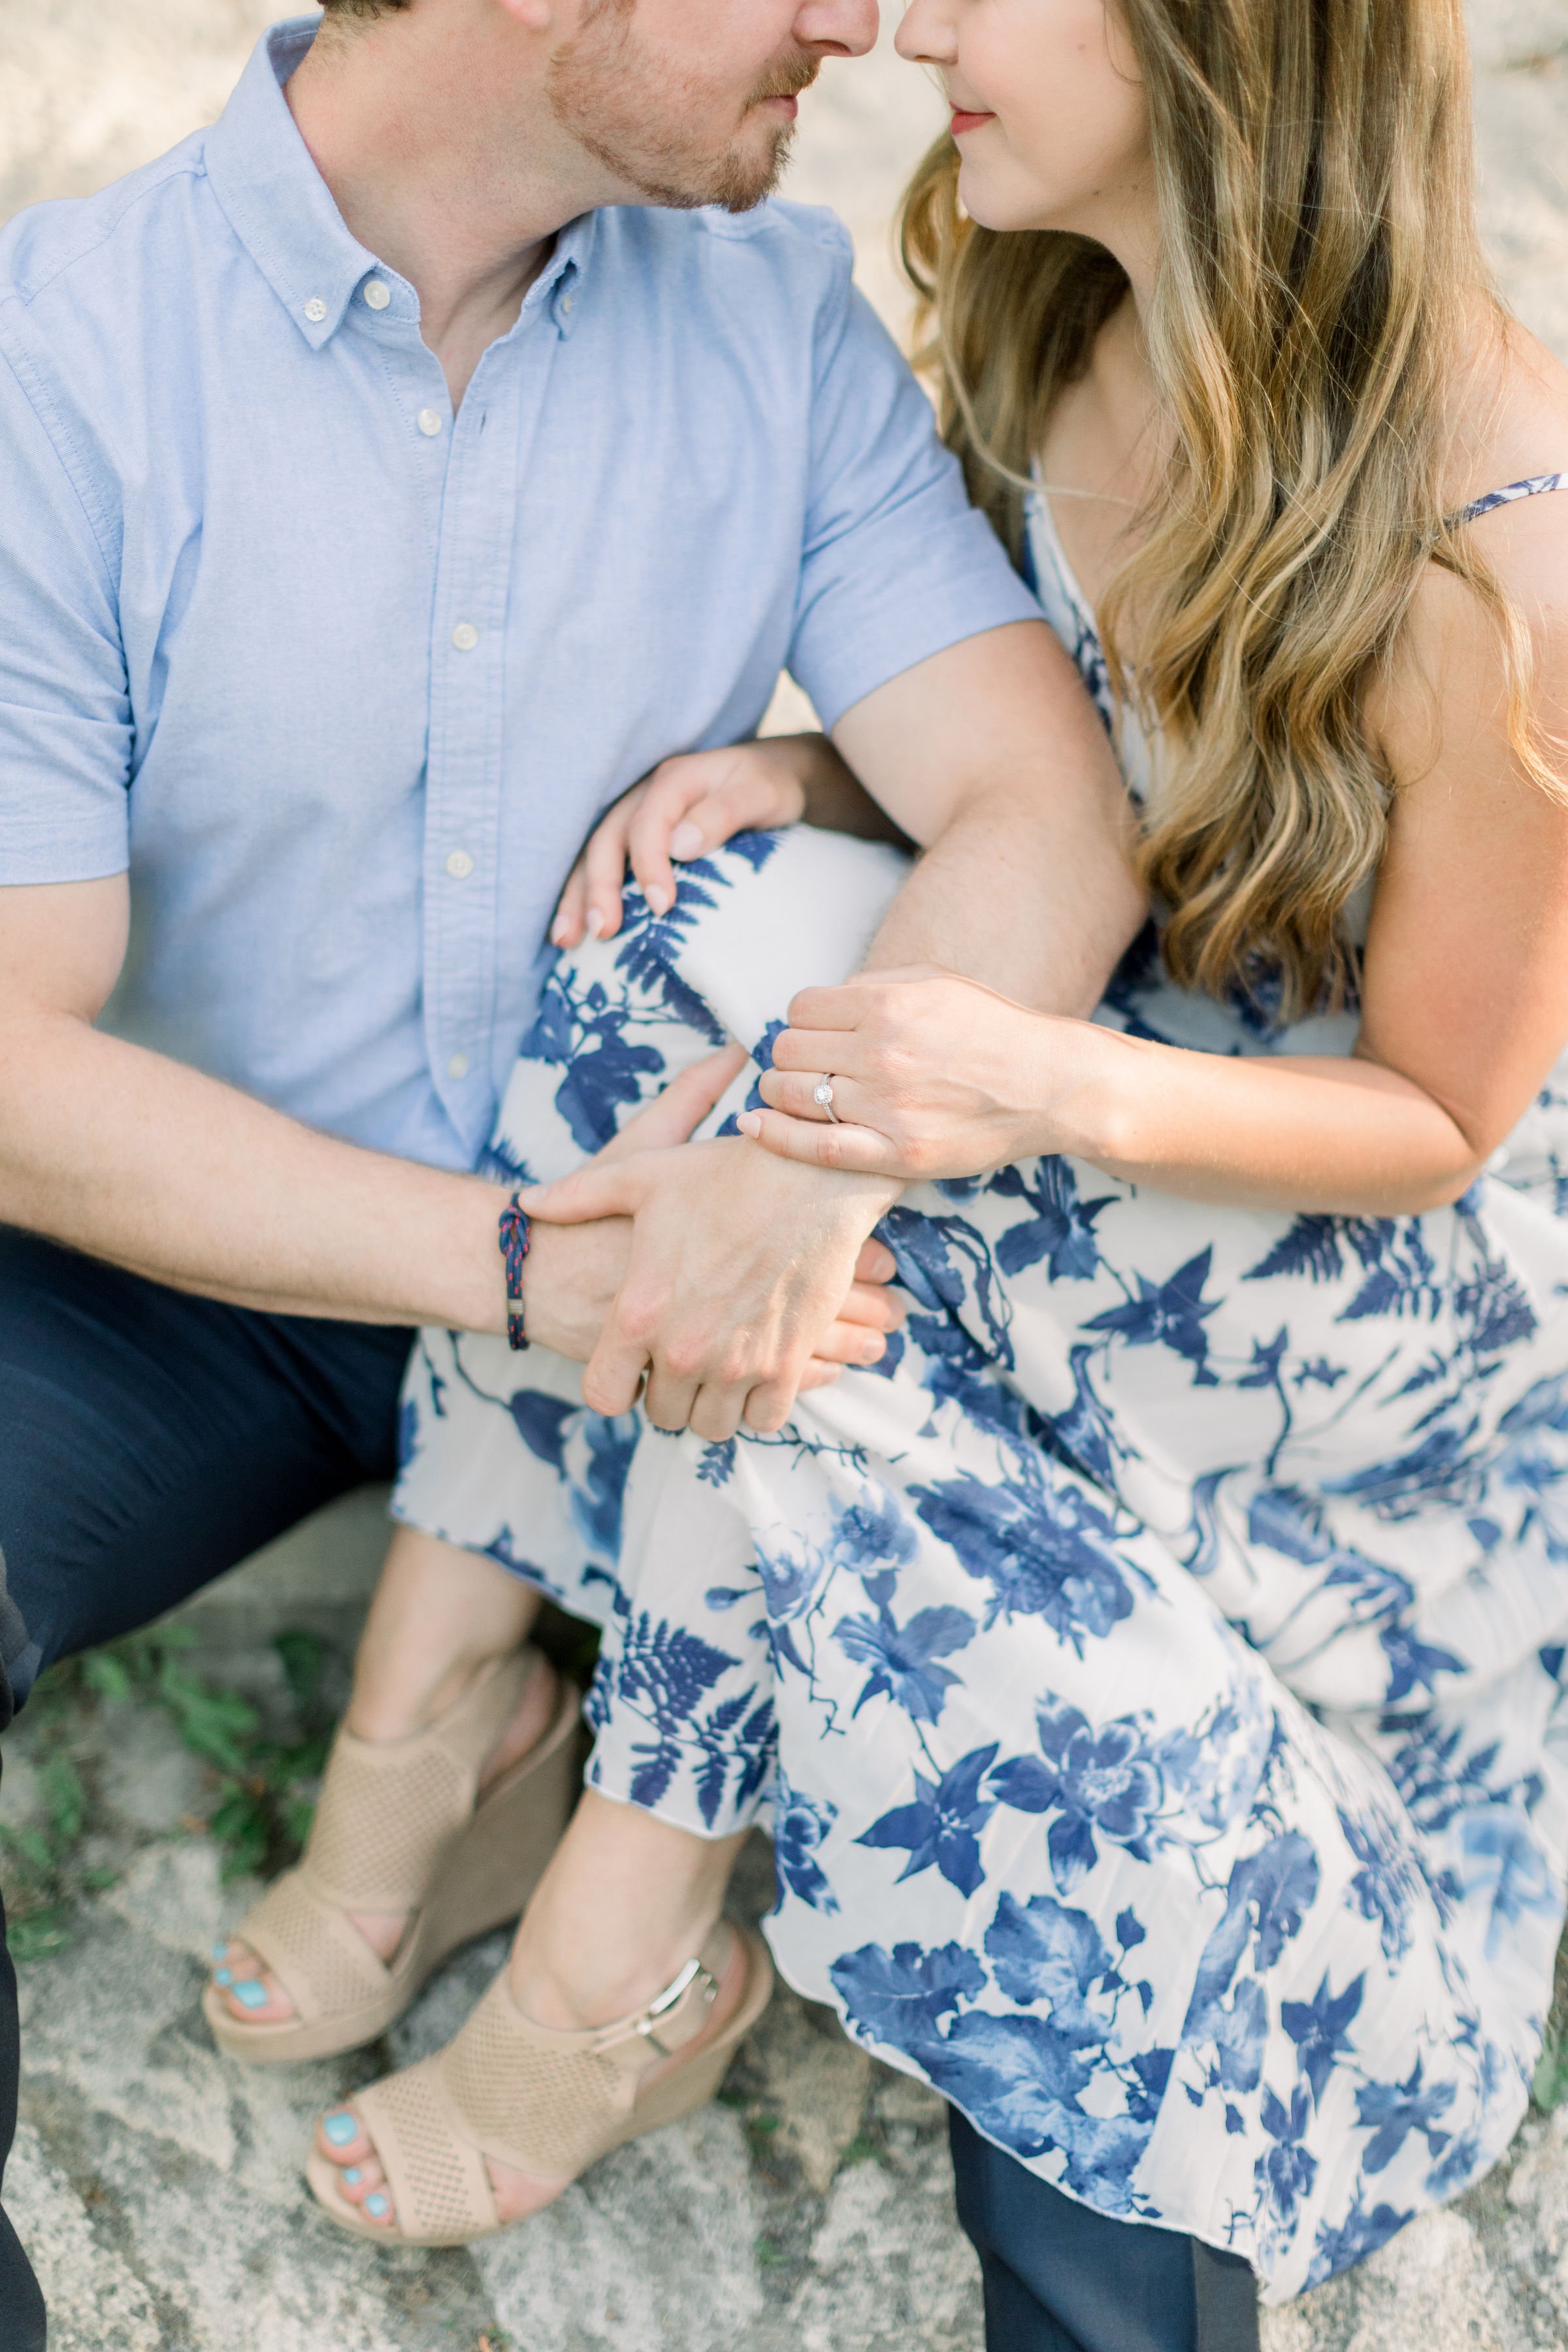  In Almonte Chelsea Mason Photography captures a close-up of an engaged couple on a tree stump. blue engagements summer engagement #chelseamasonphotography #chelseamasonengagements #OttawaEngagements #Almonteengagementphotographer #outdoorengagments 